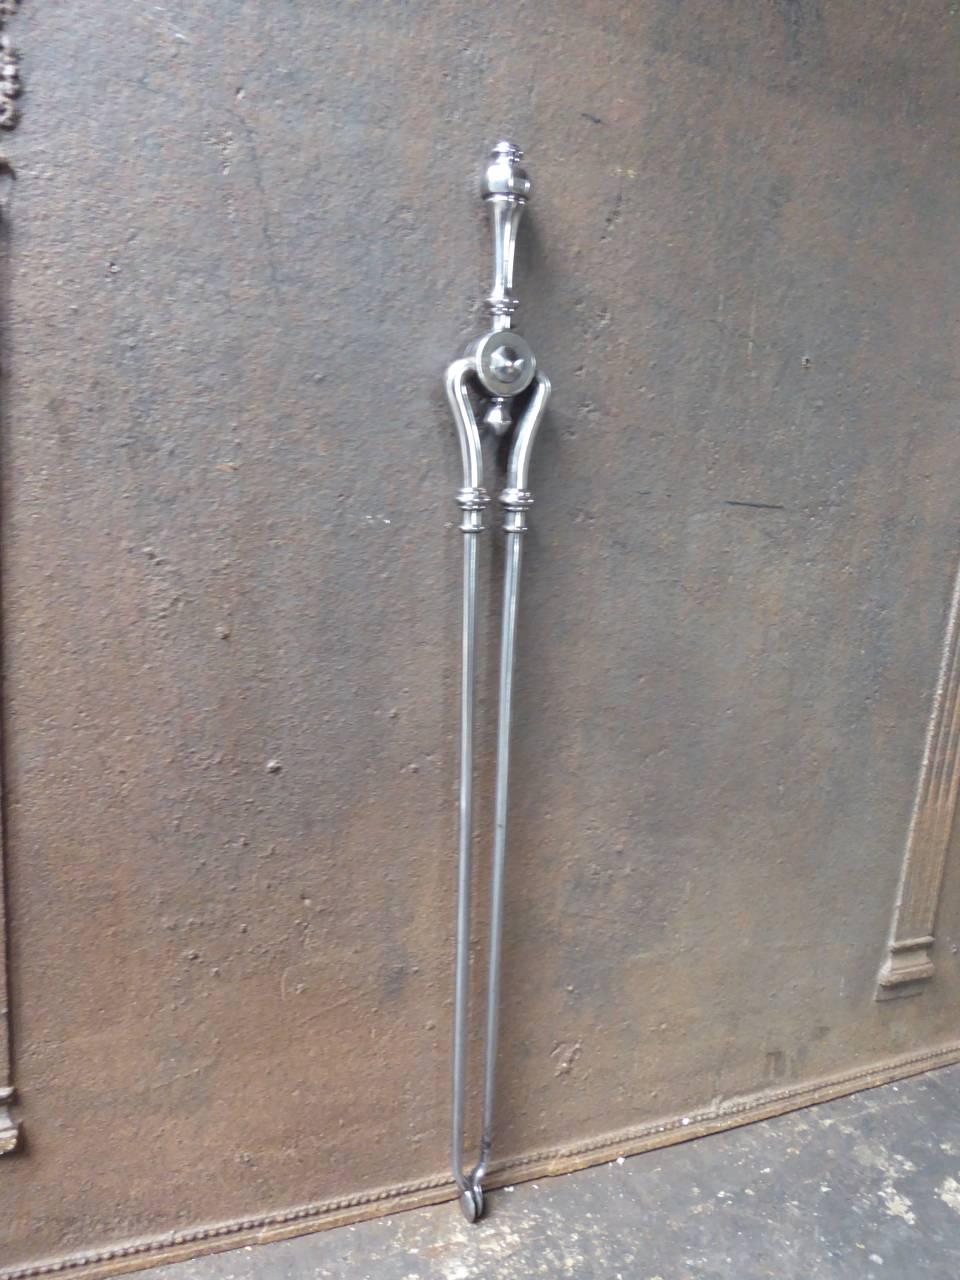 19th century English fire tongs made of polished steel.

We have a unique and specialized collection of antique and used fireplace accessories consisting of more than 1000 listings at 1stdibs. Amongst others we always have 300+ firebacks, 250+ pairs